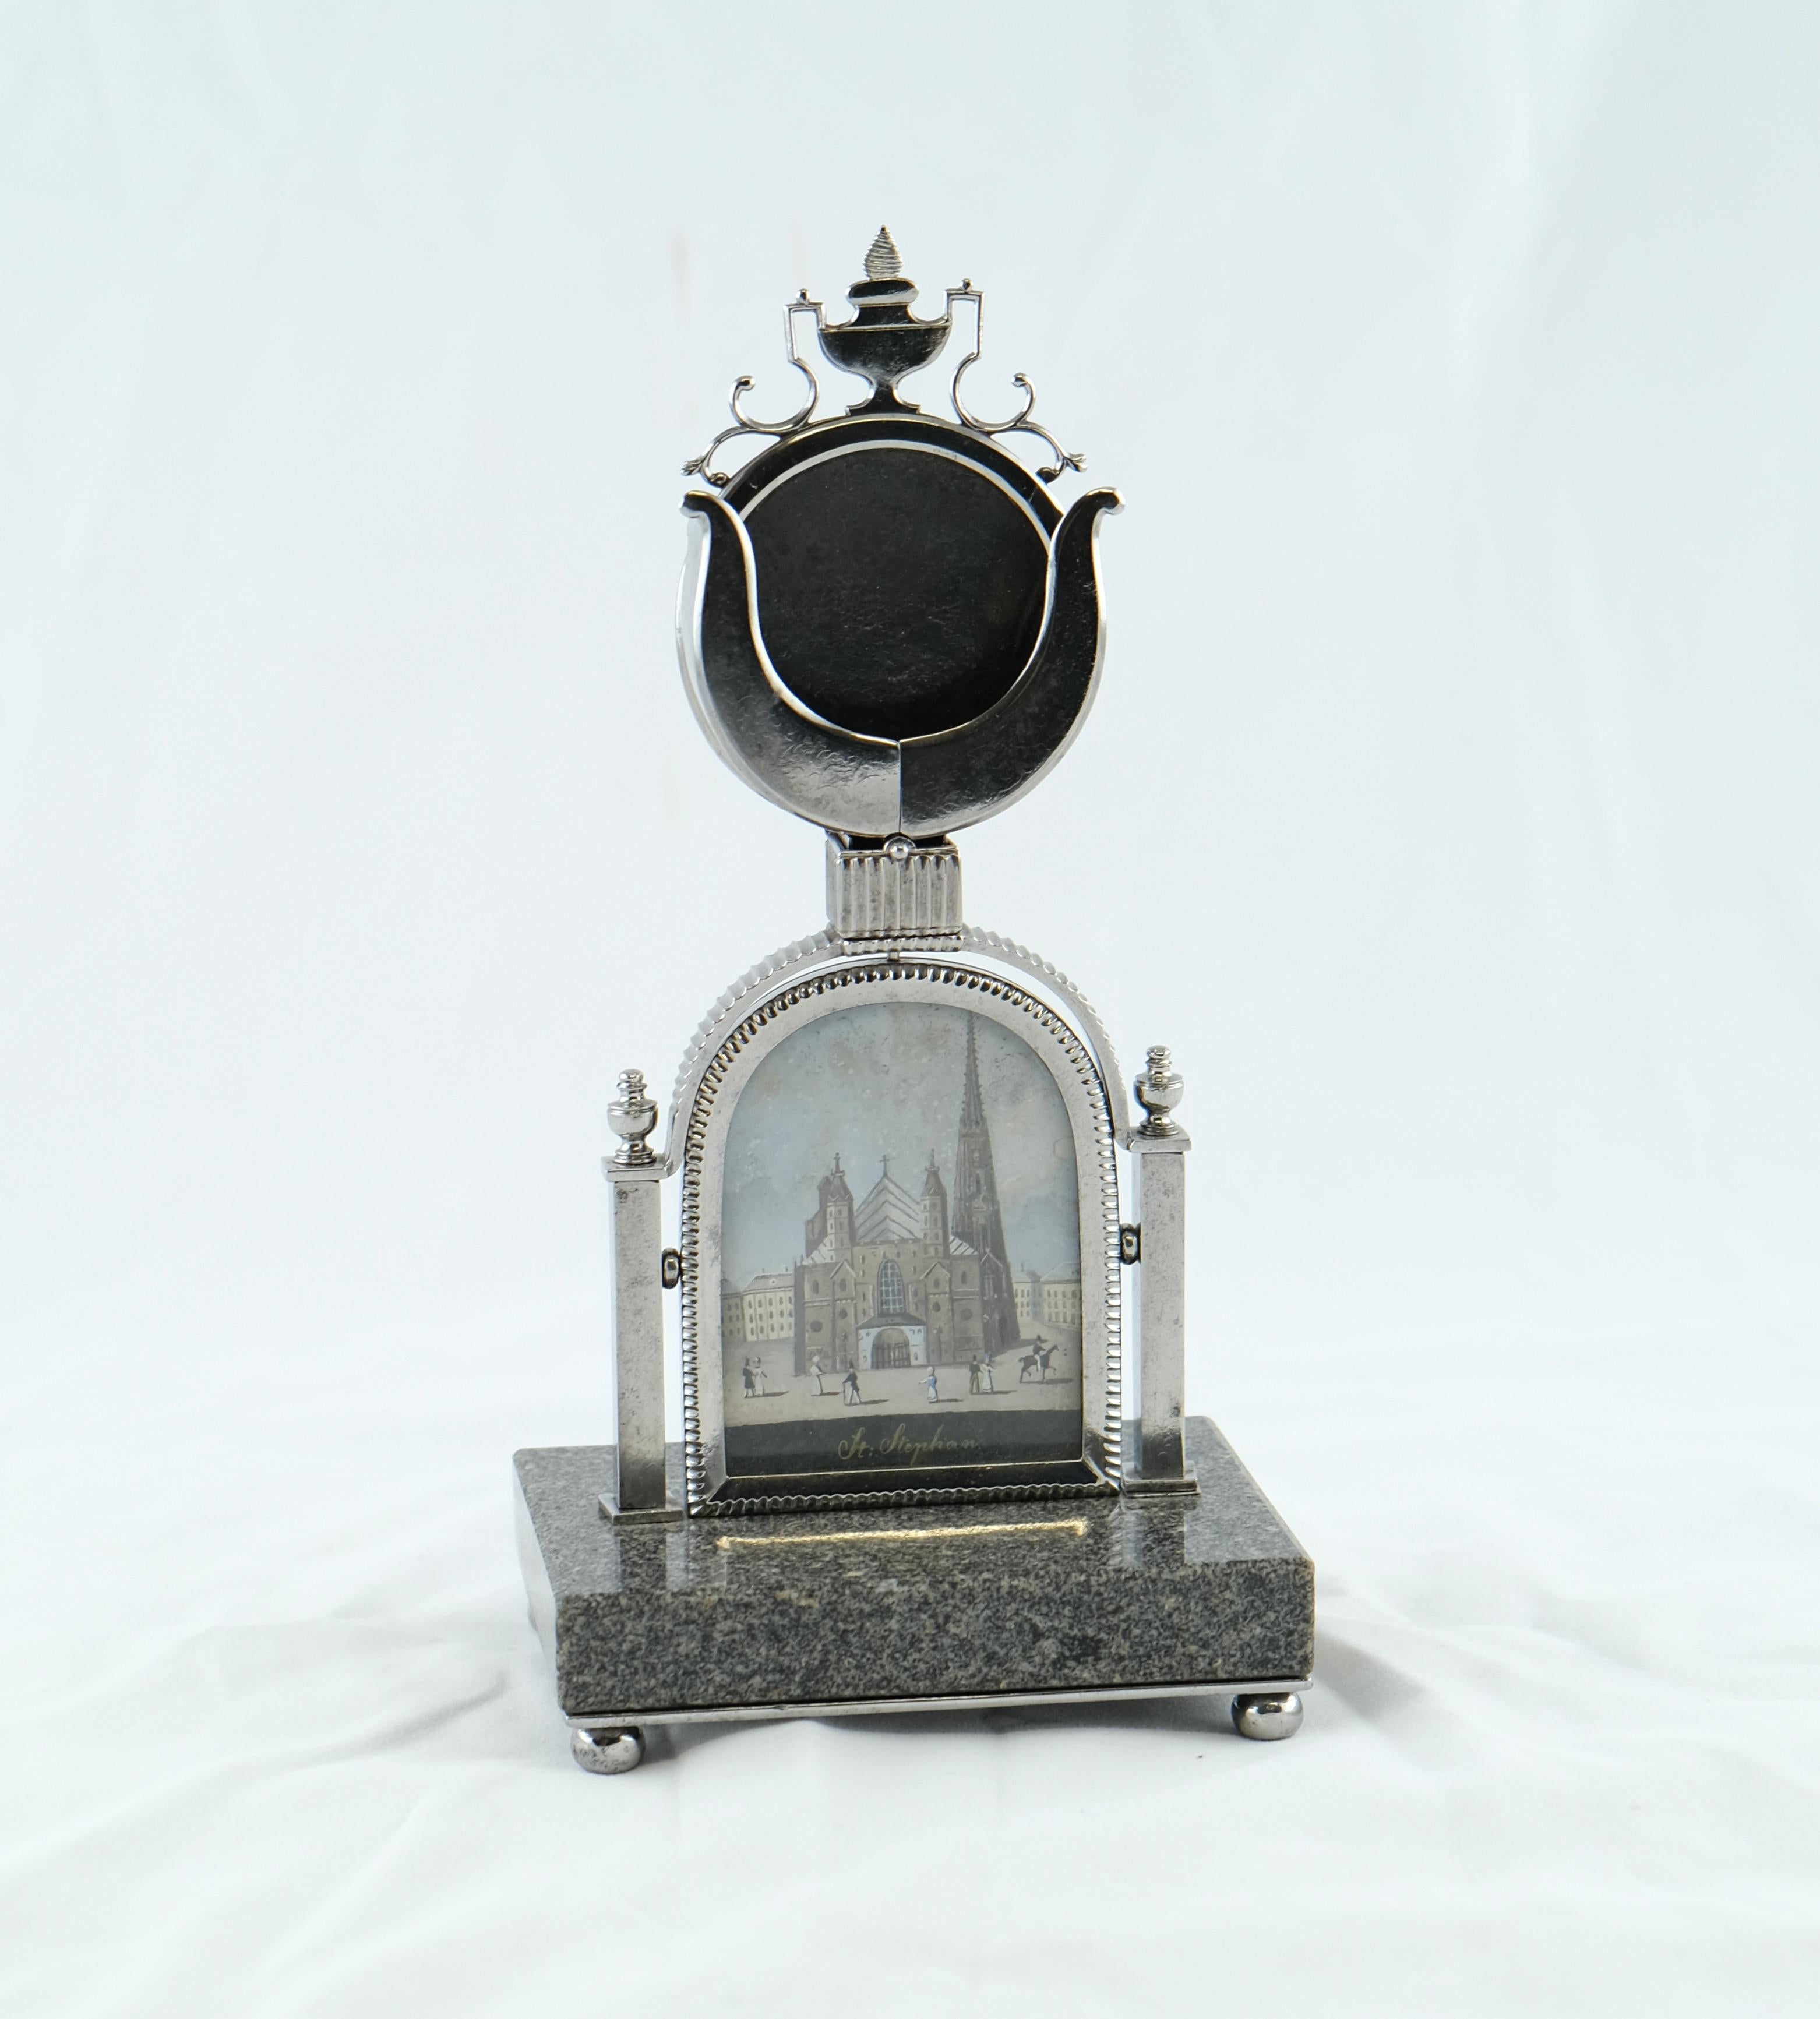 A beautiful and exclusive clock stand made of steel and granite. Holding a picture of the Stephans-dome. The most famous church in Wienna, Austria.
High quality craftsmanship on all details. A gem.